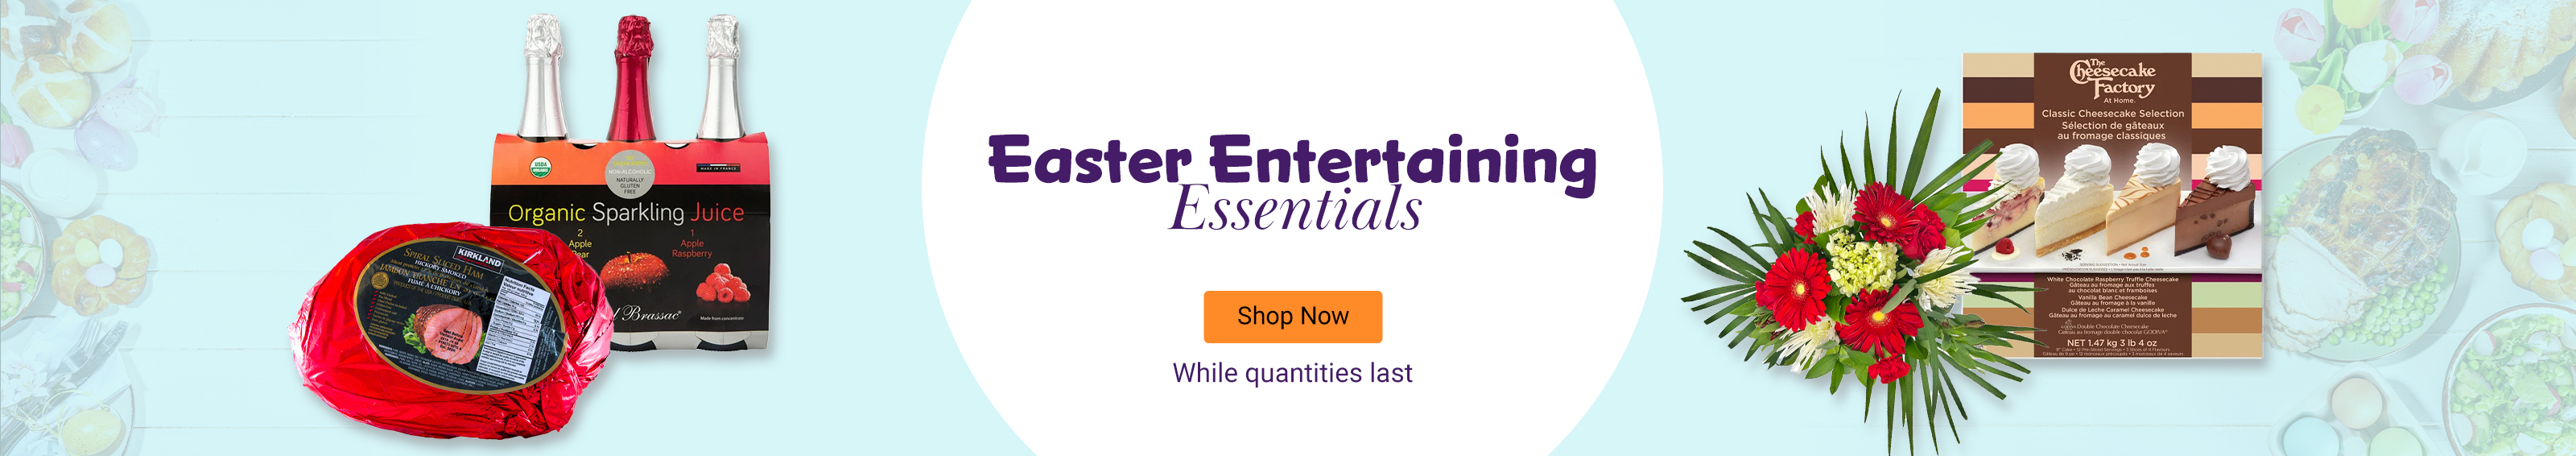 Easter Entertaining Essentials. Shop Now. While quantities last.